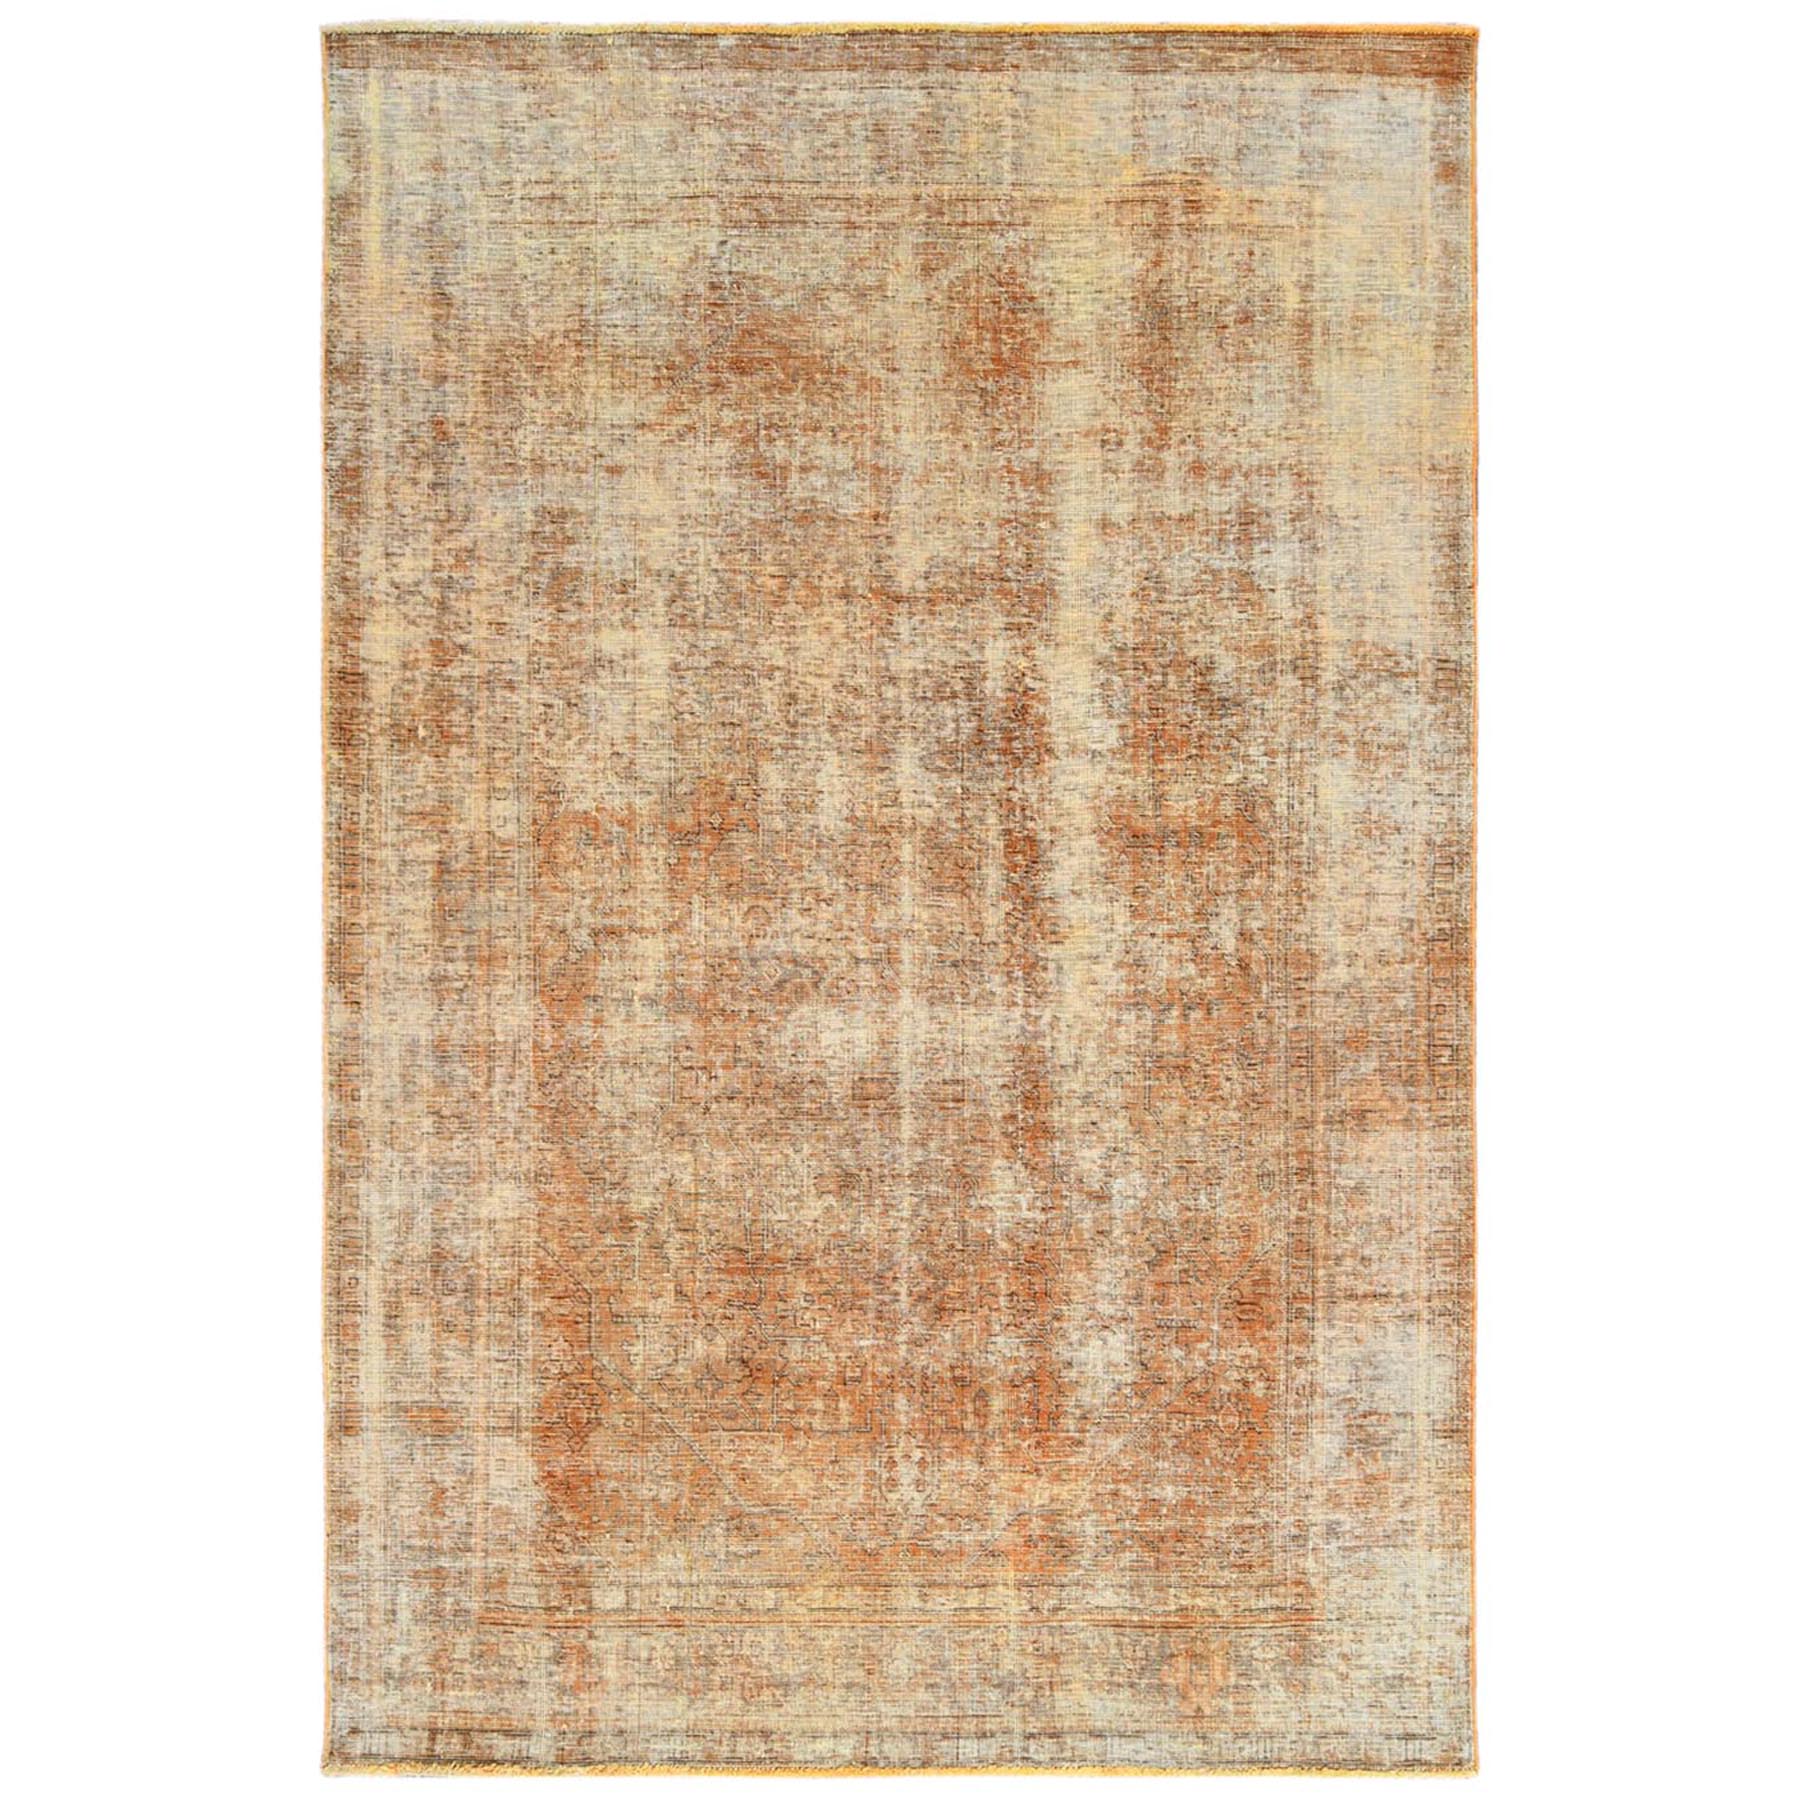 Fetneh Collection And Vintage Overdyed Collection Hand Knotted Orange Rug No: 1122492